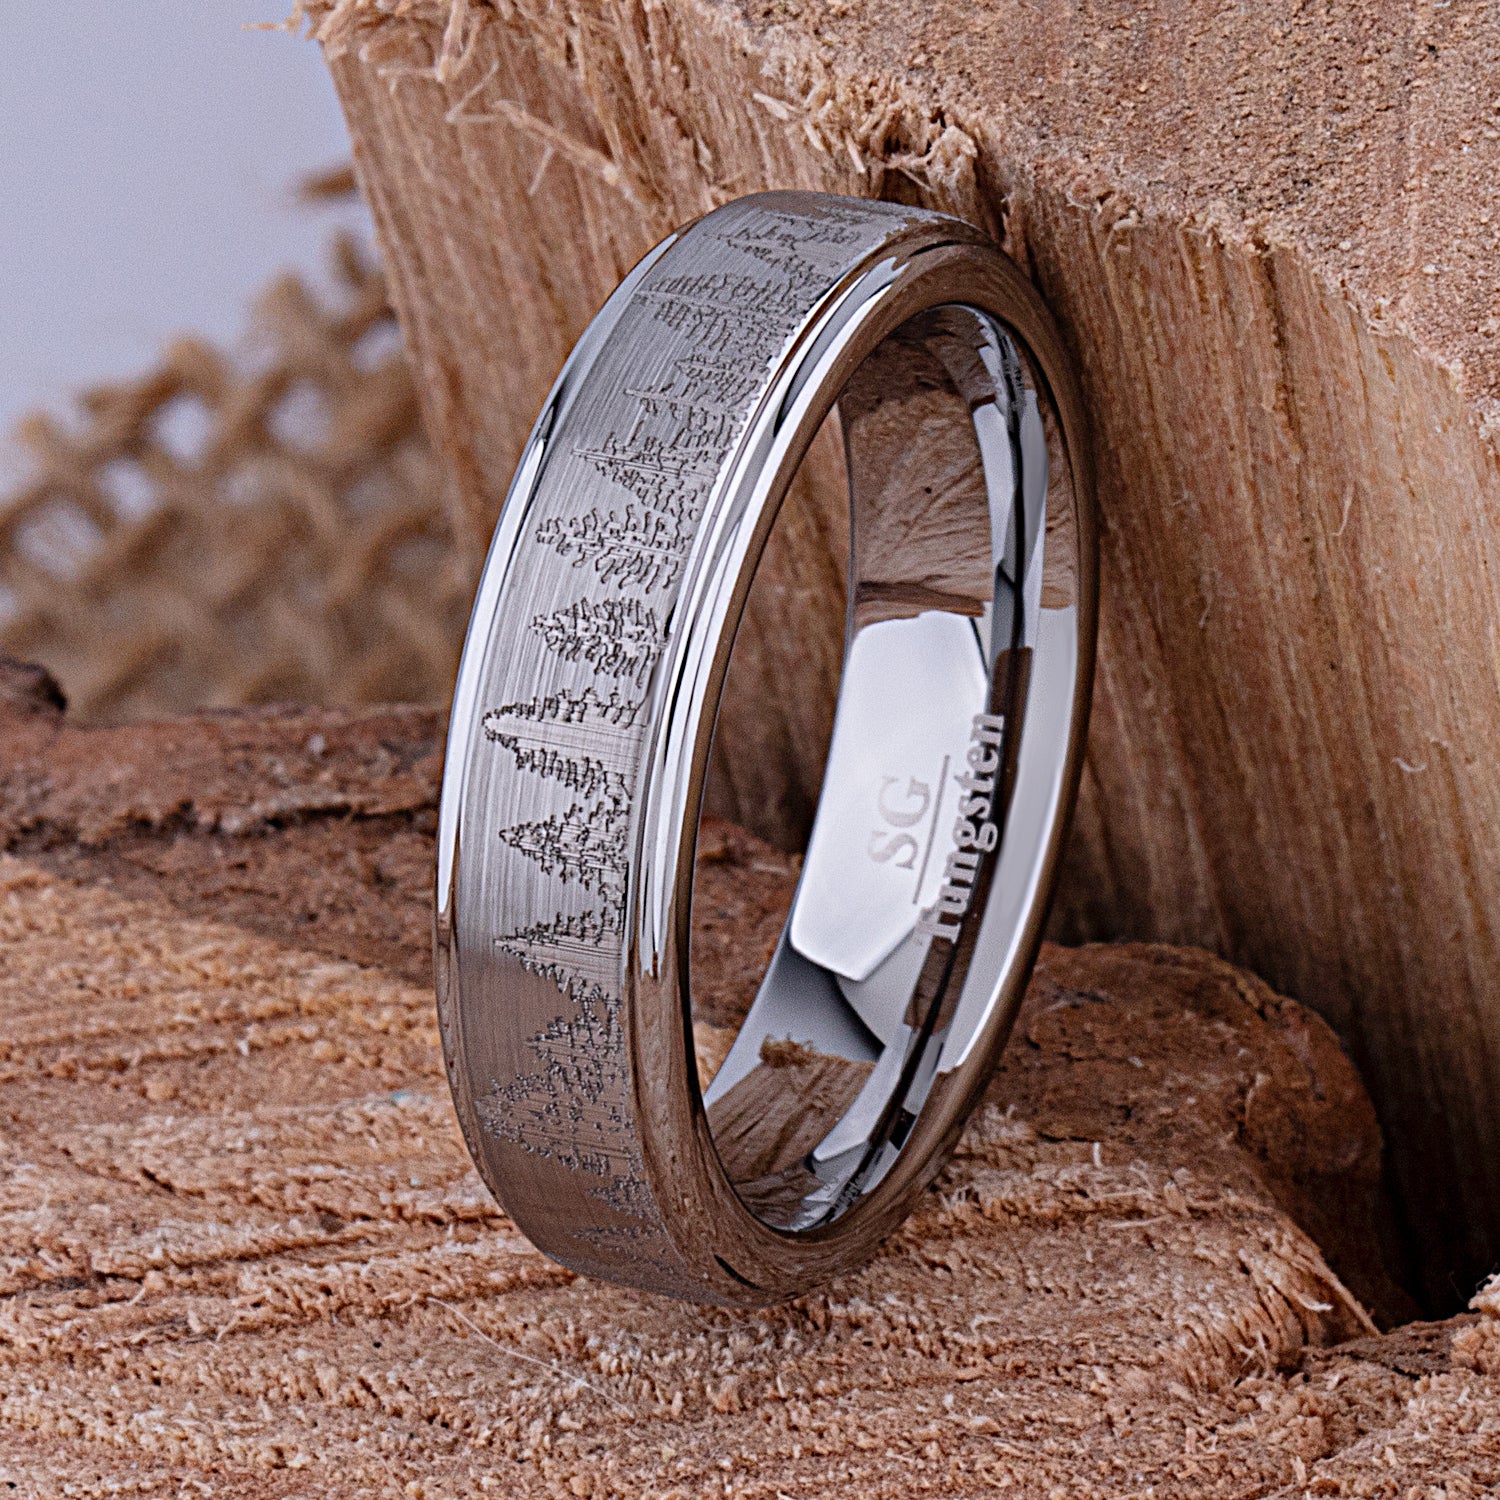 Forest Tungsten Band for Wedding or Engagement 6mm Wide, Unisex Promise Ring, Anniversary Band For Man or Woman, Tungsten Ring Tree Design